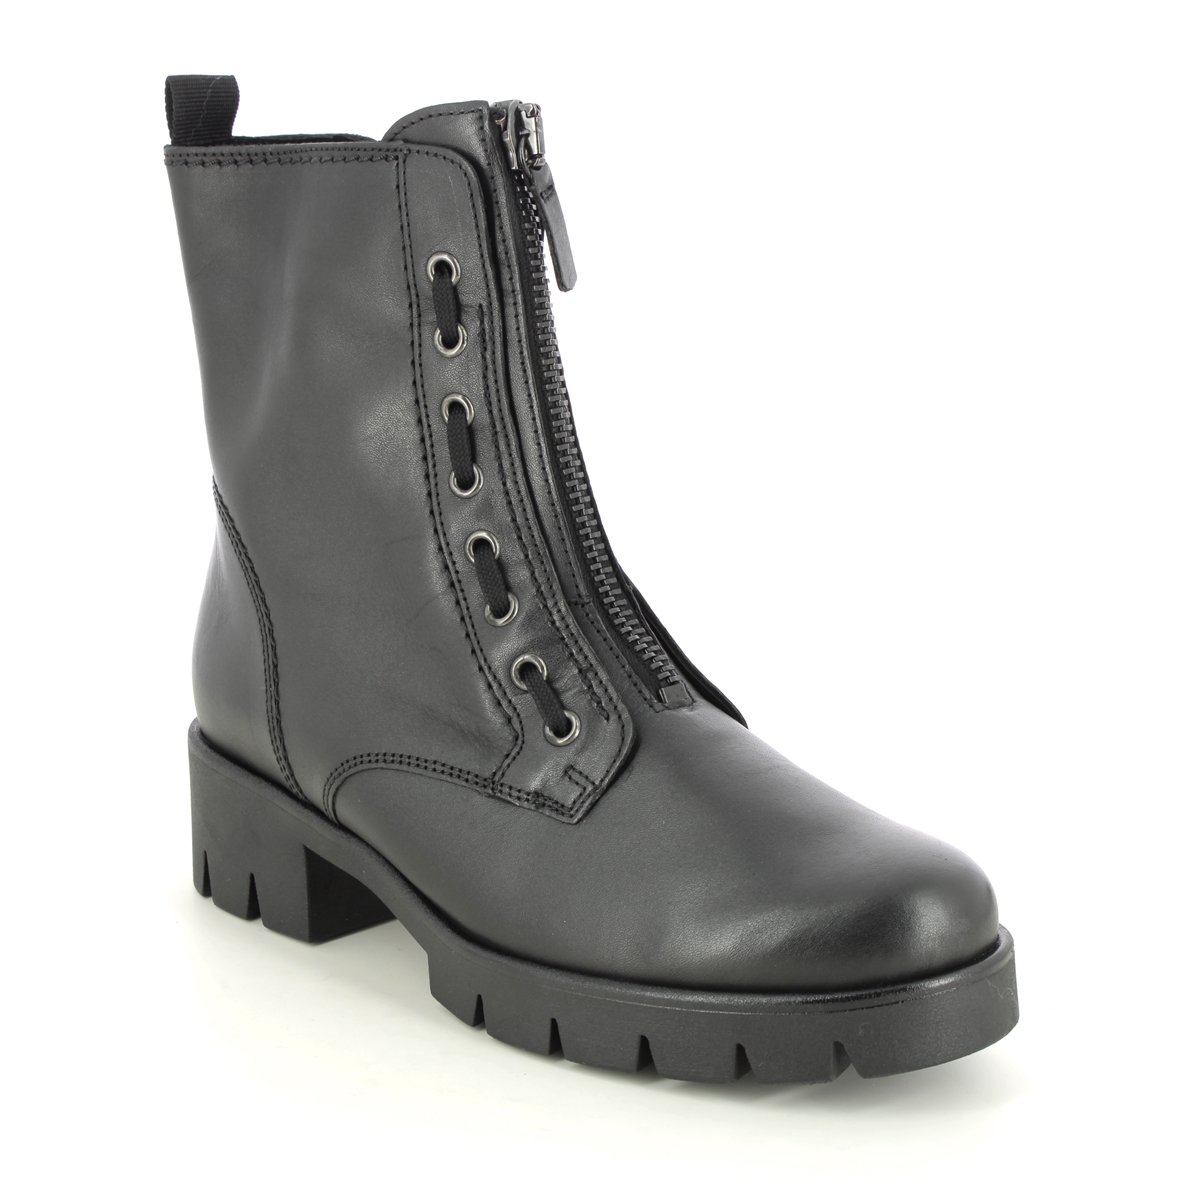 Gabor Banter Black Leather Womens Biker Boots 31.716.27 in a Plain Leather in Size 8